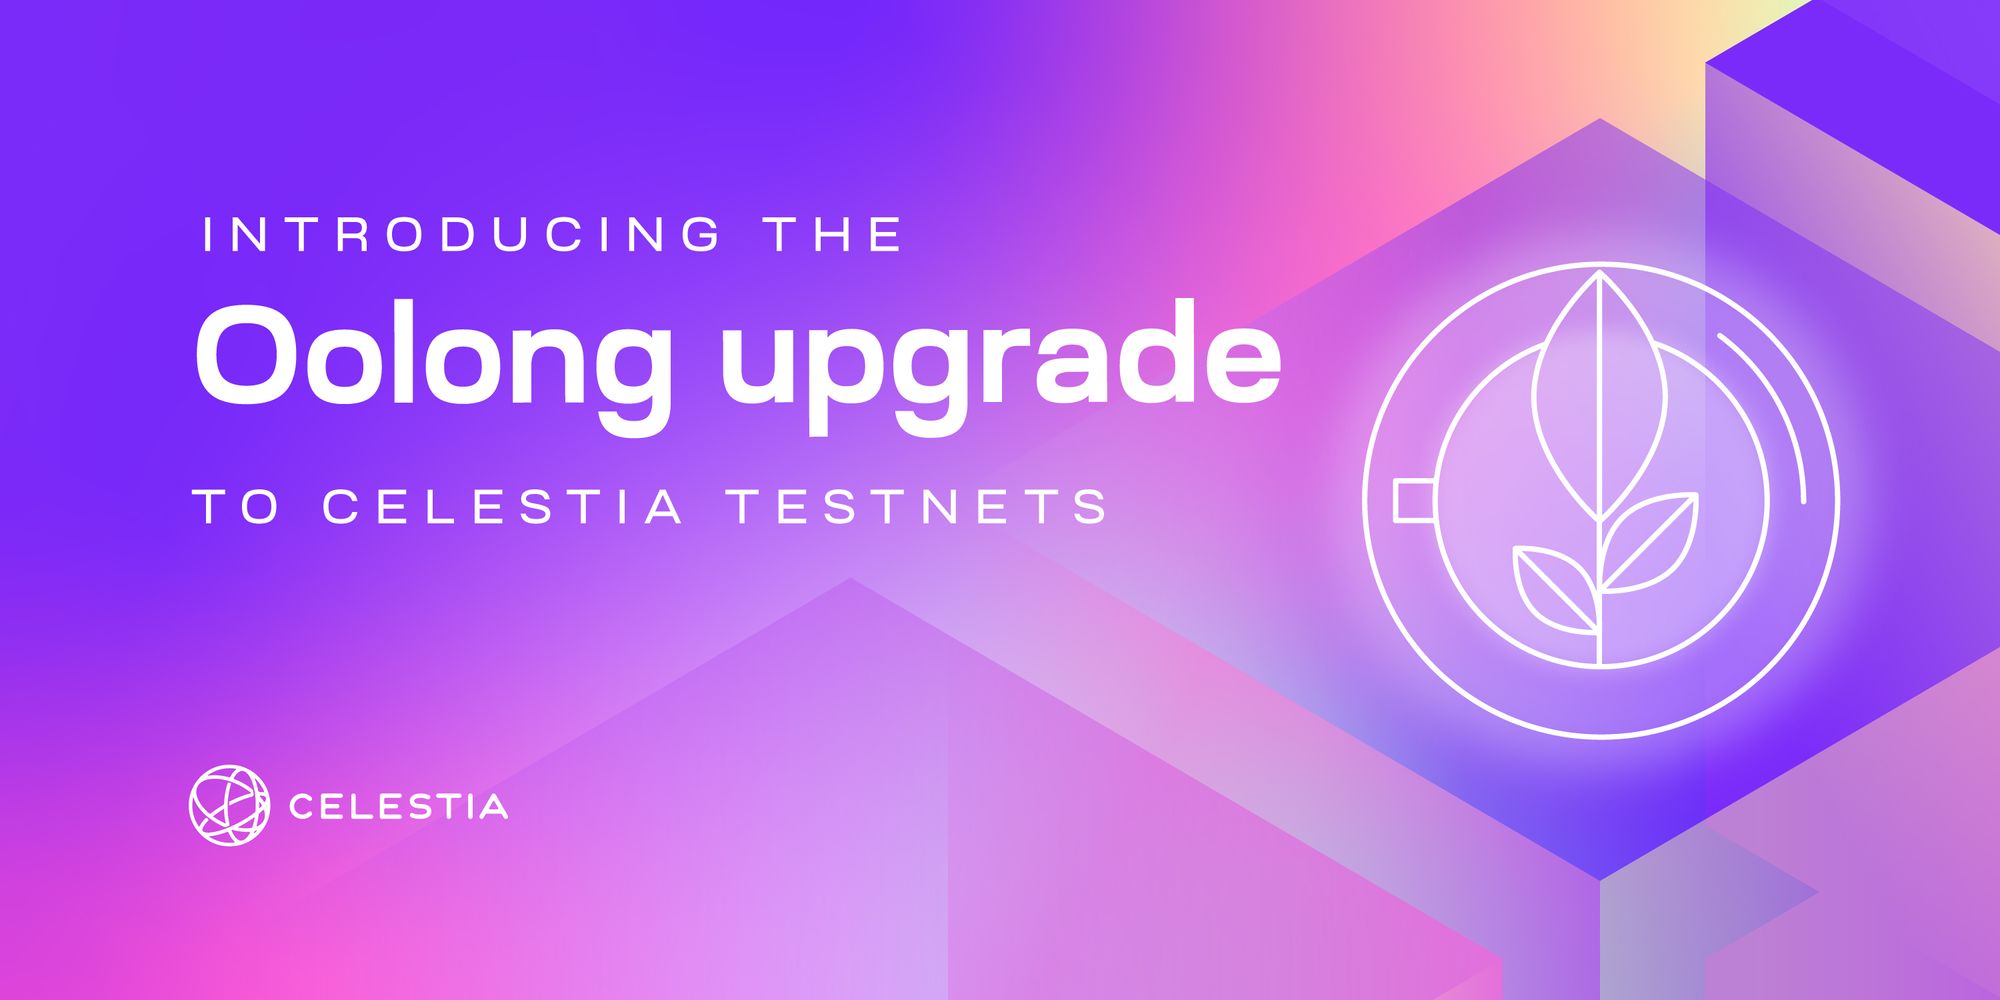 Introducing the Oolong upgrade to Celestia testnets